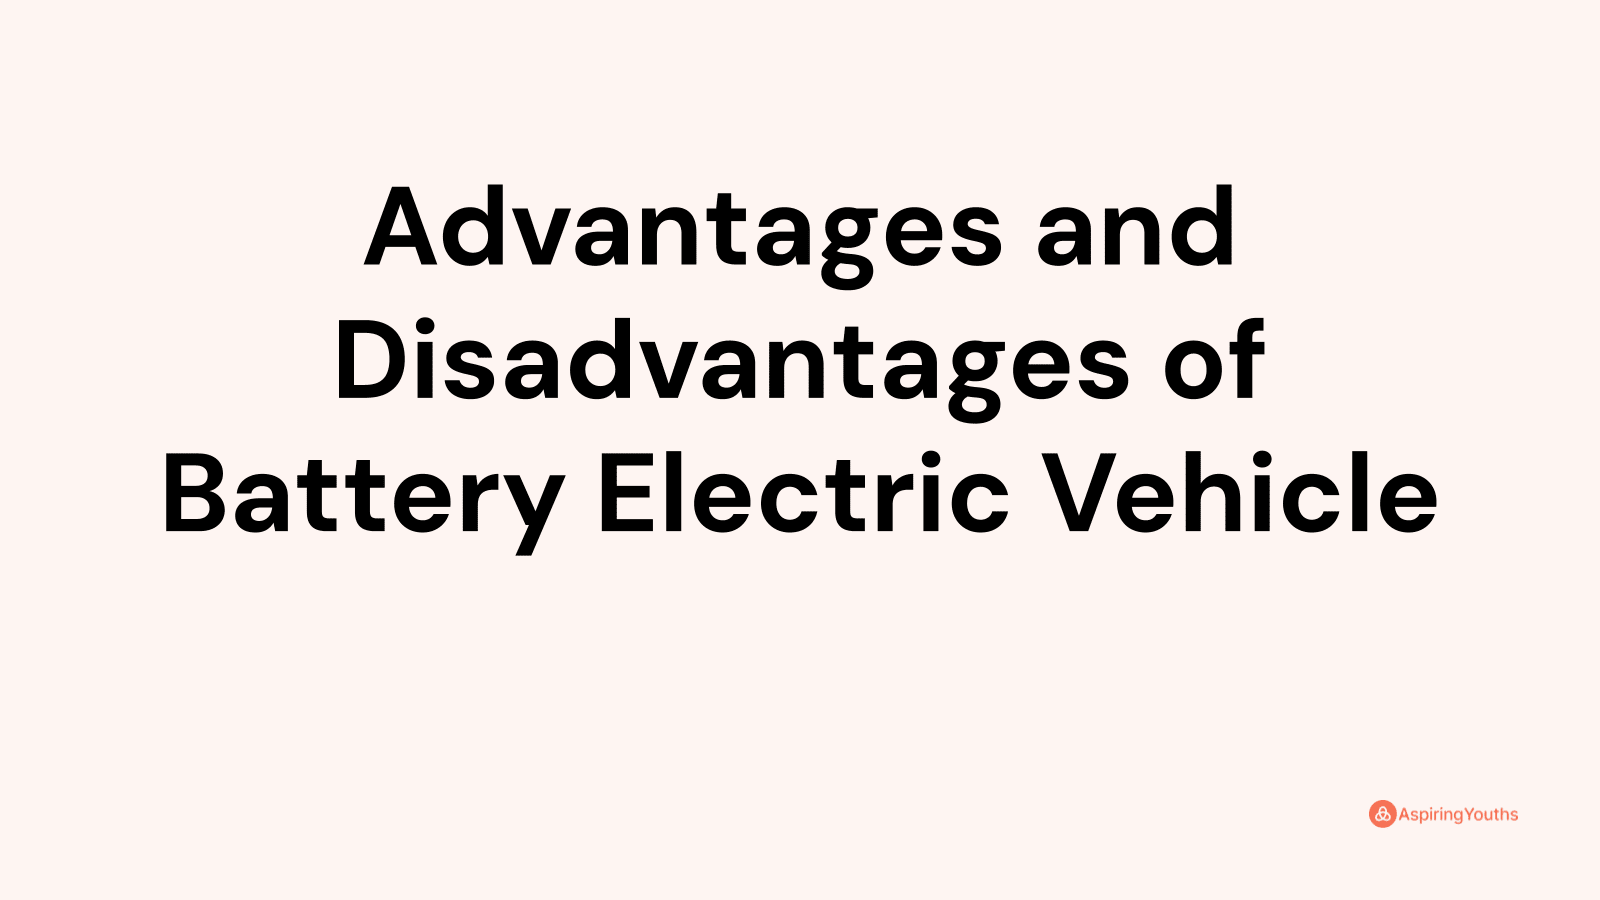 Advantages and Disadvantages of Battery Electric Vehicle